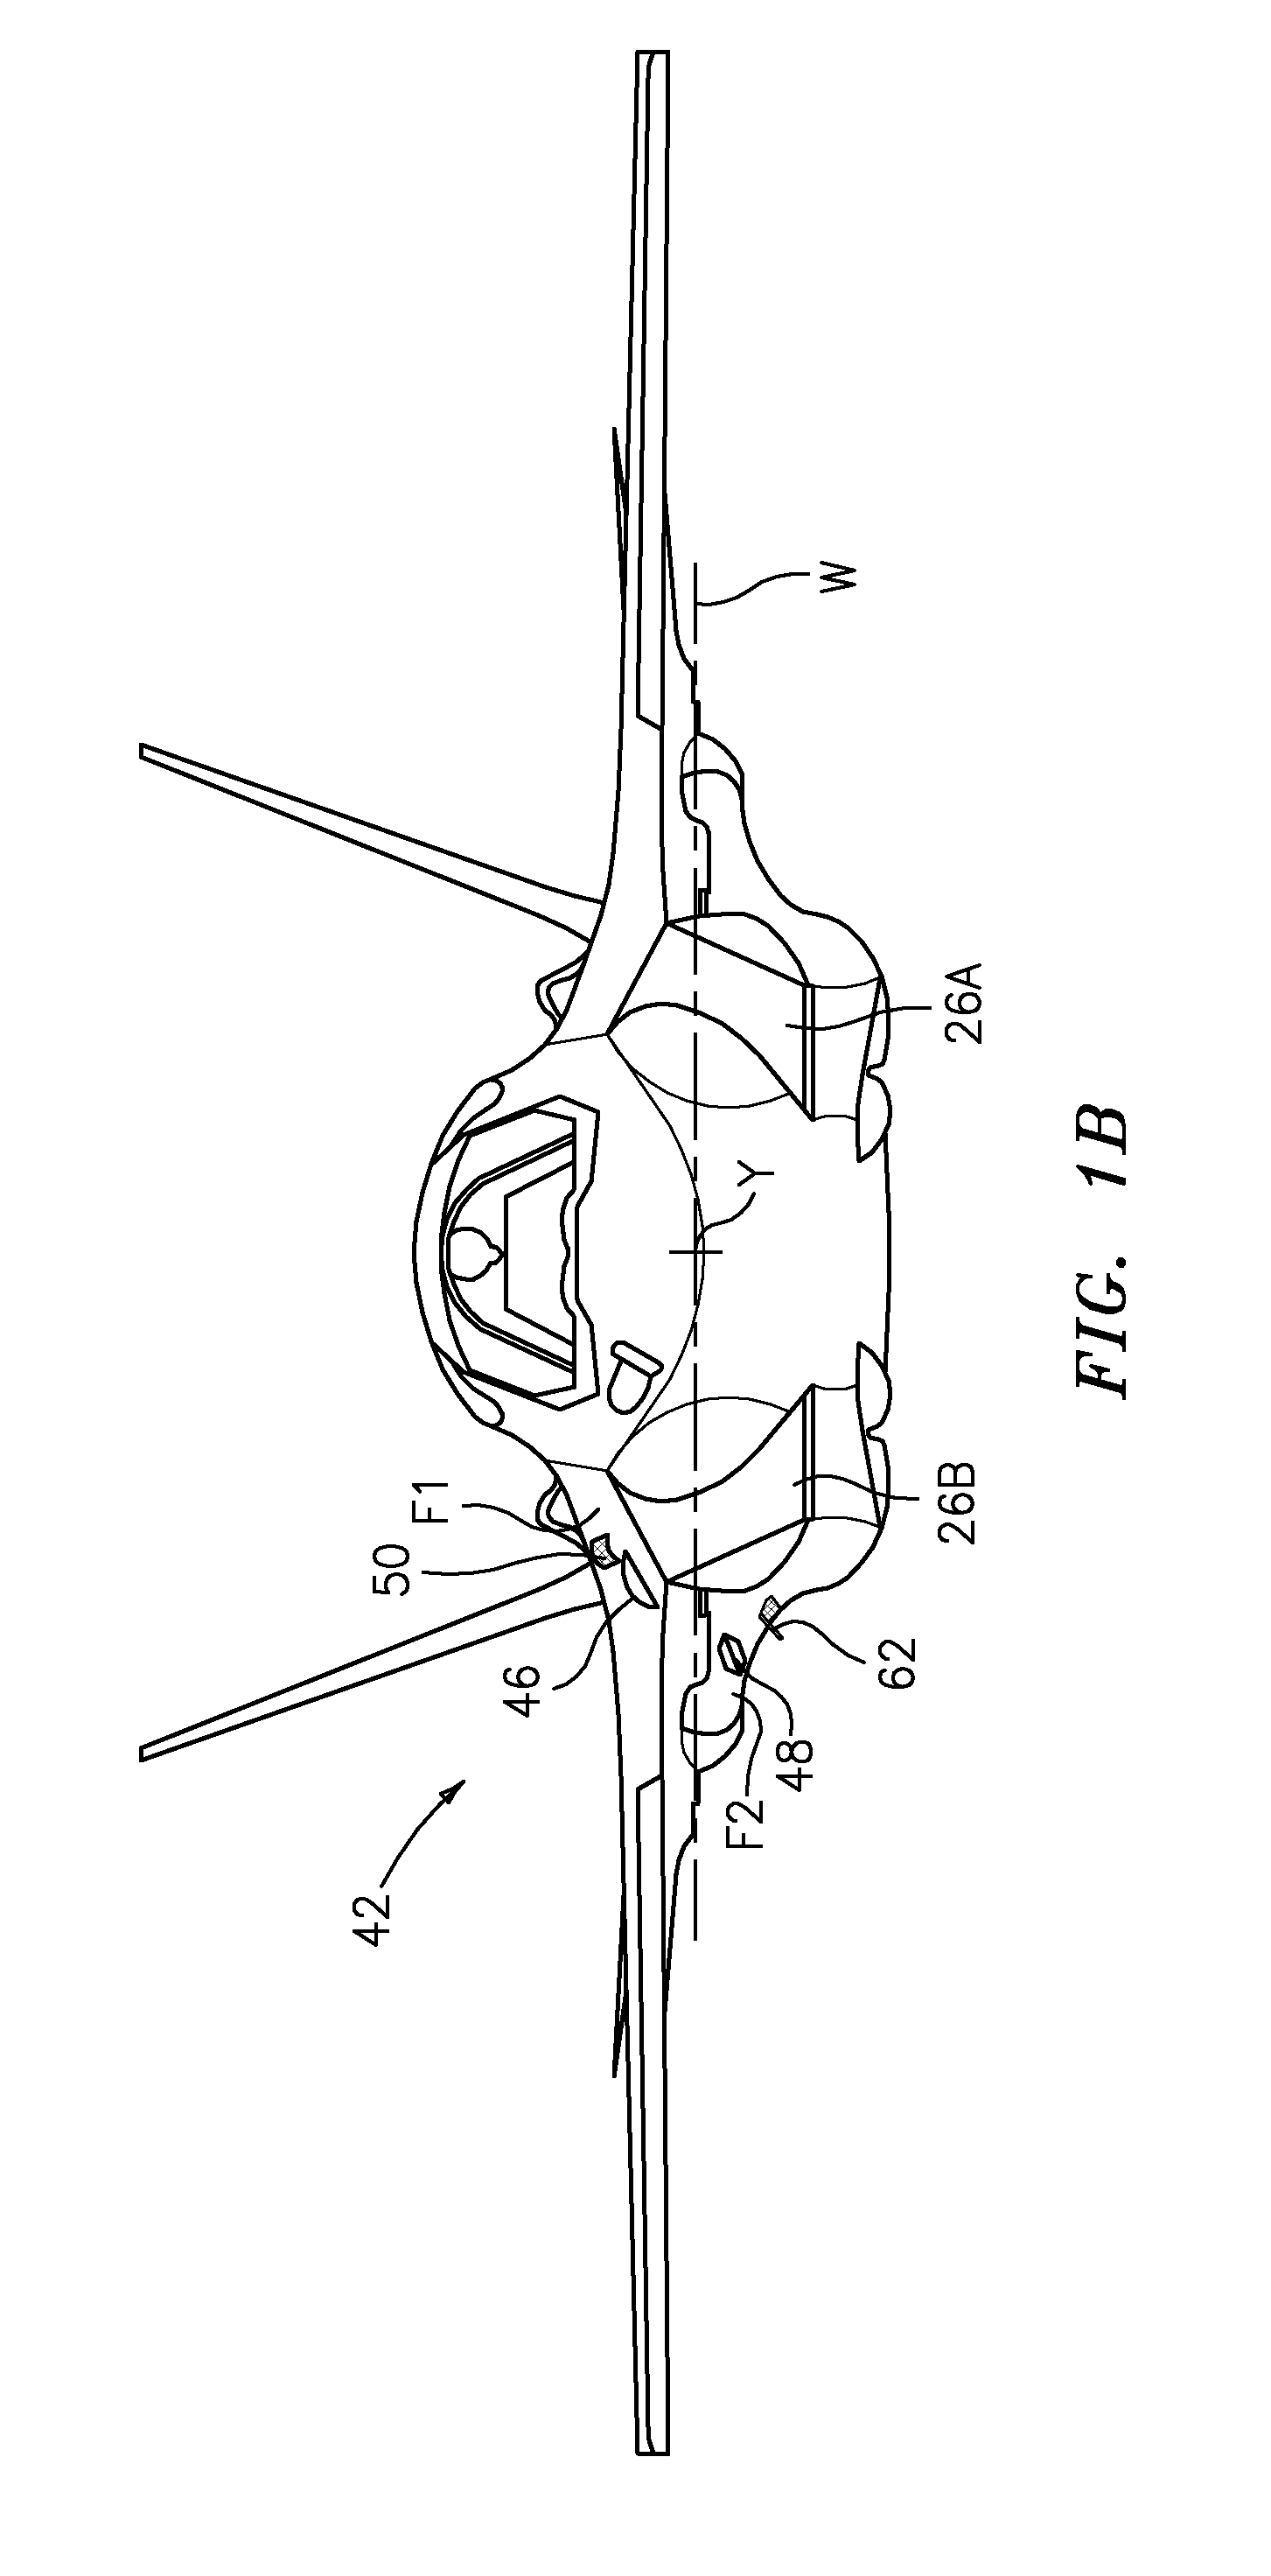 Aircraft thermal management system with reduced exhaust re-ingestion